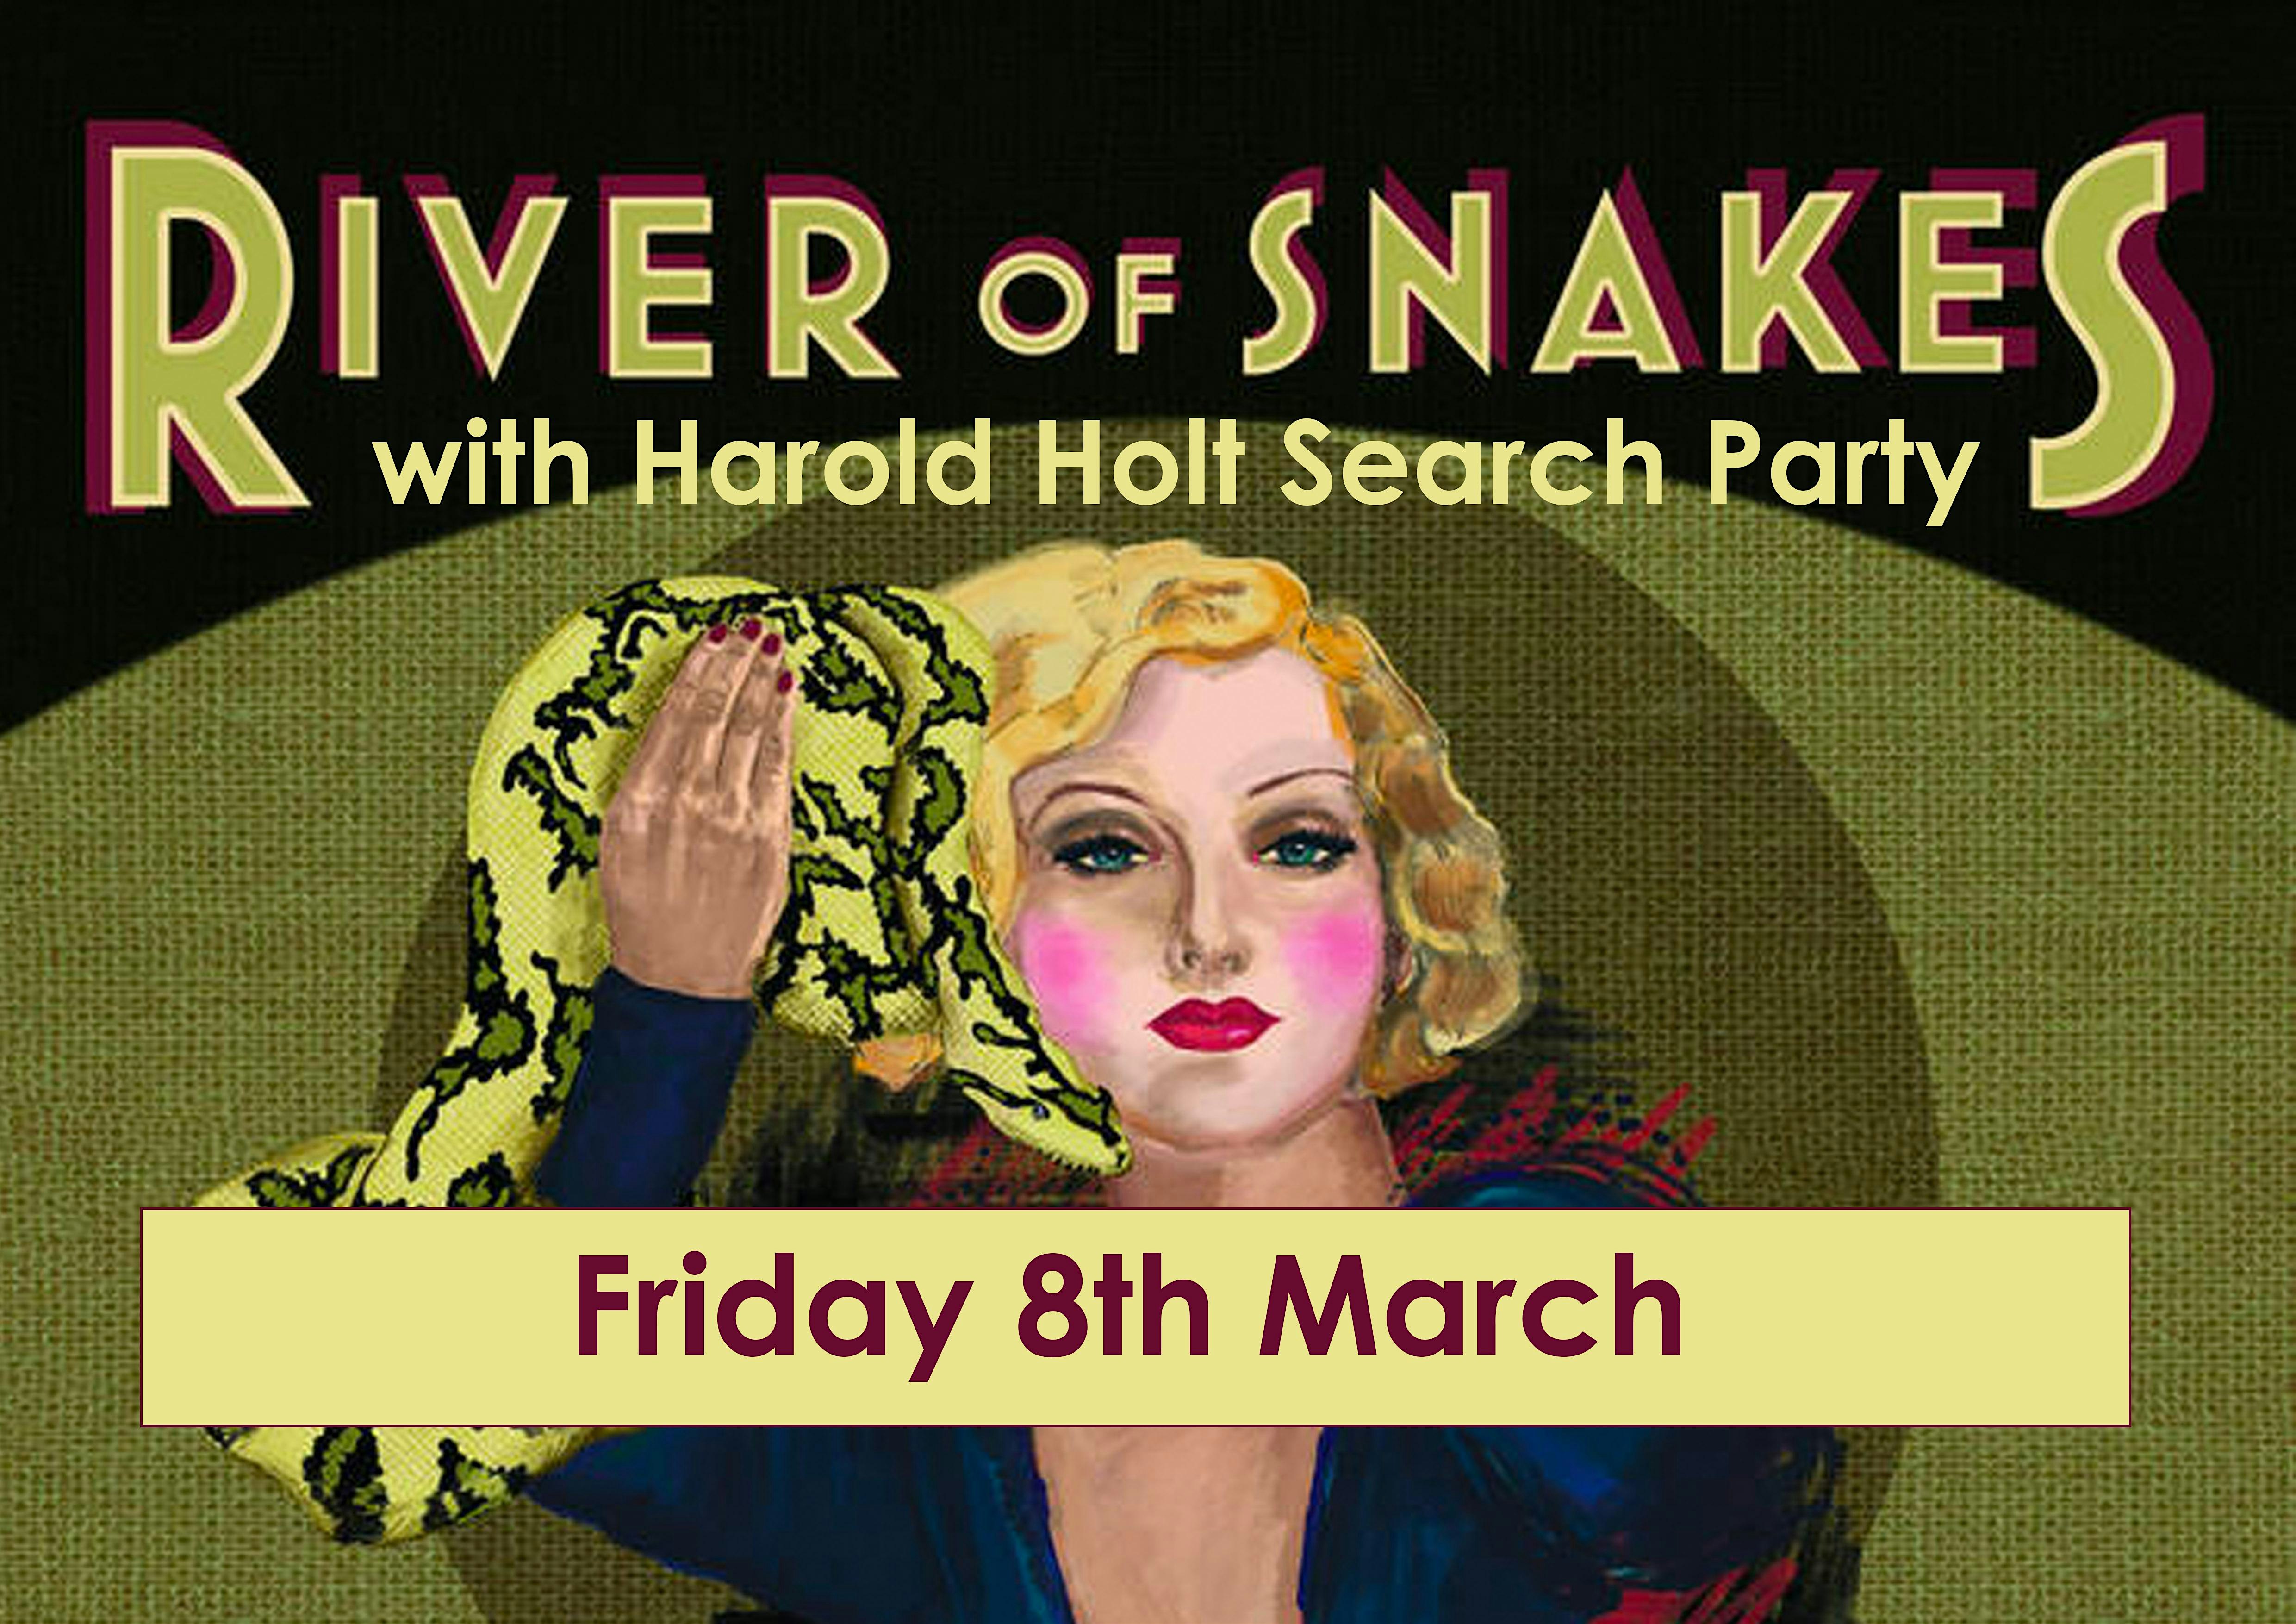 RIVER OF SNAKES + HAROLD HOLT SEARCH PARTY